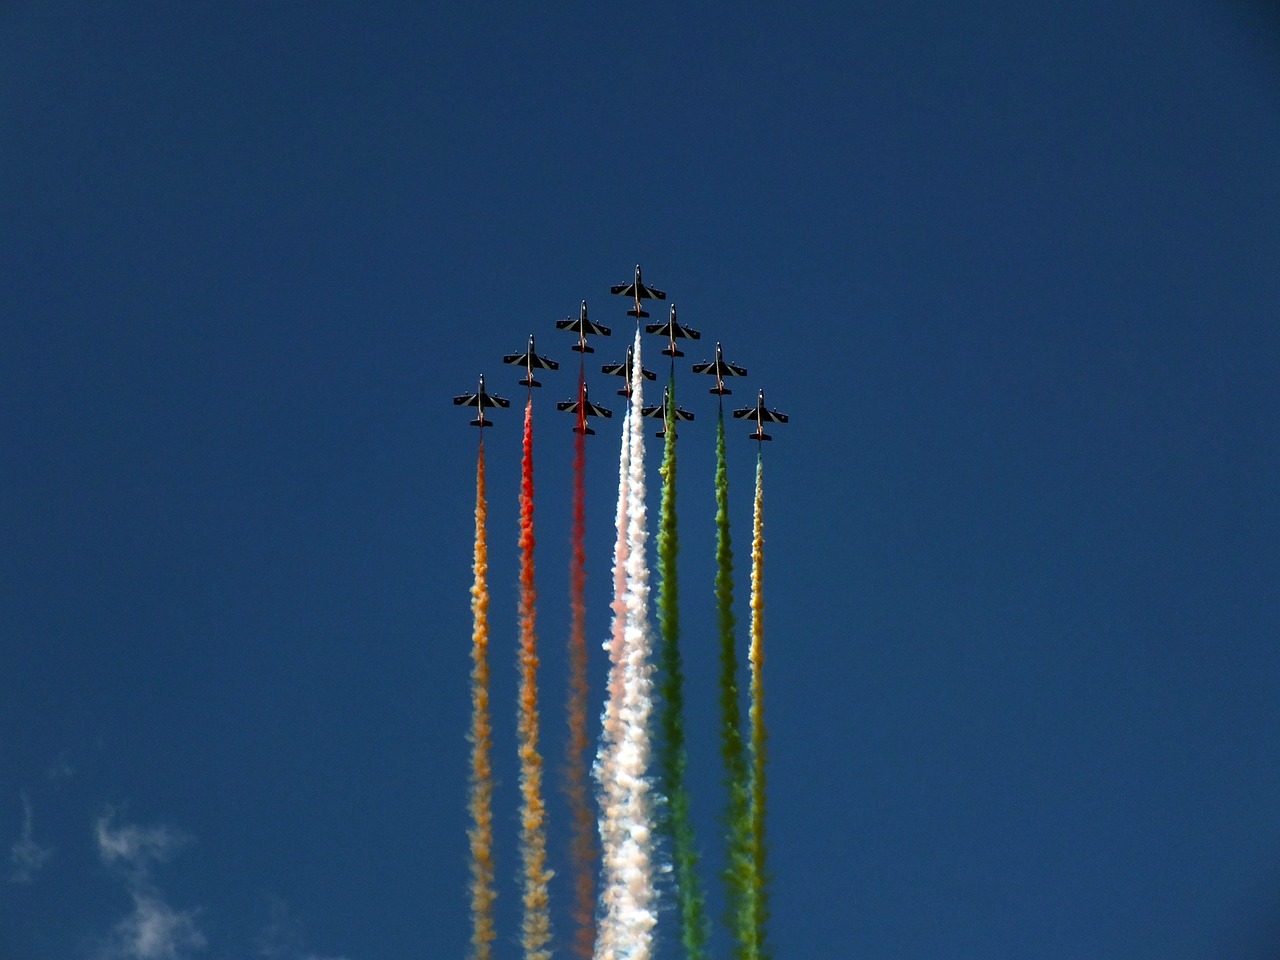 frecco tricolore air force days airshow free photo